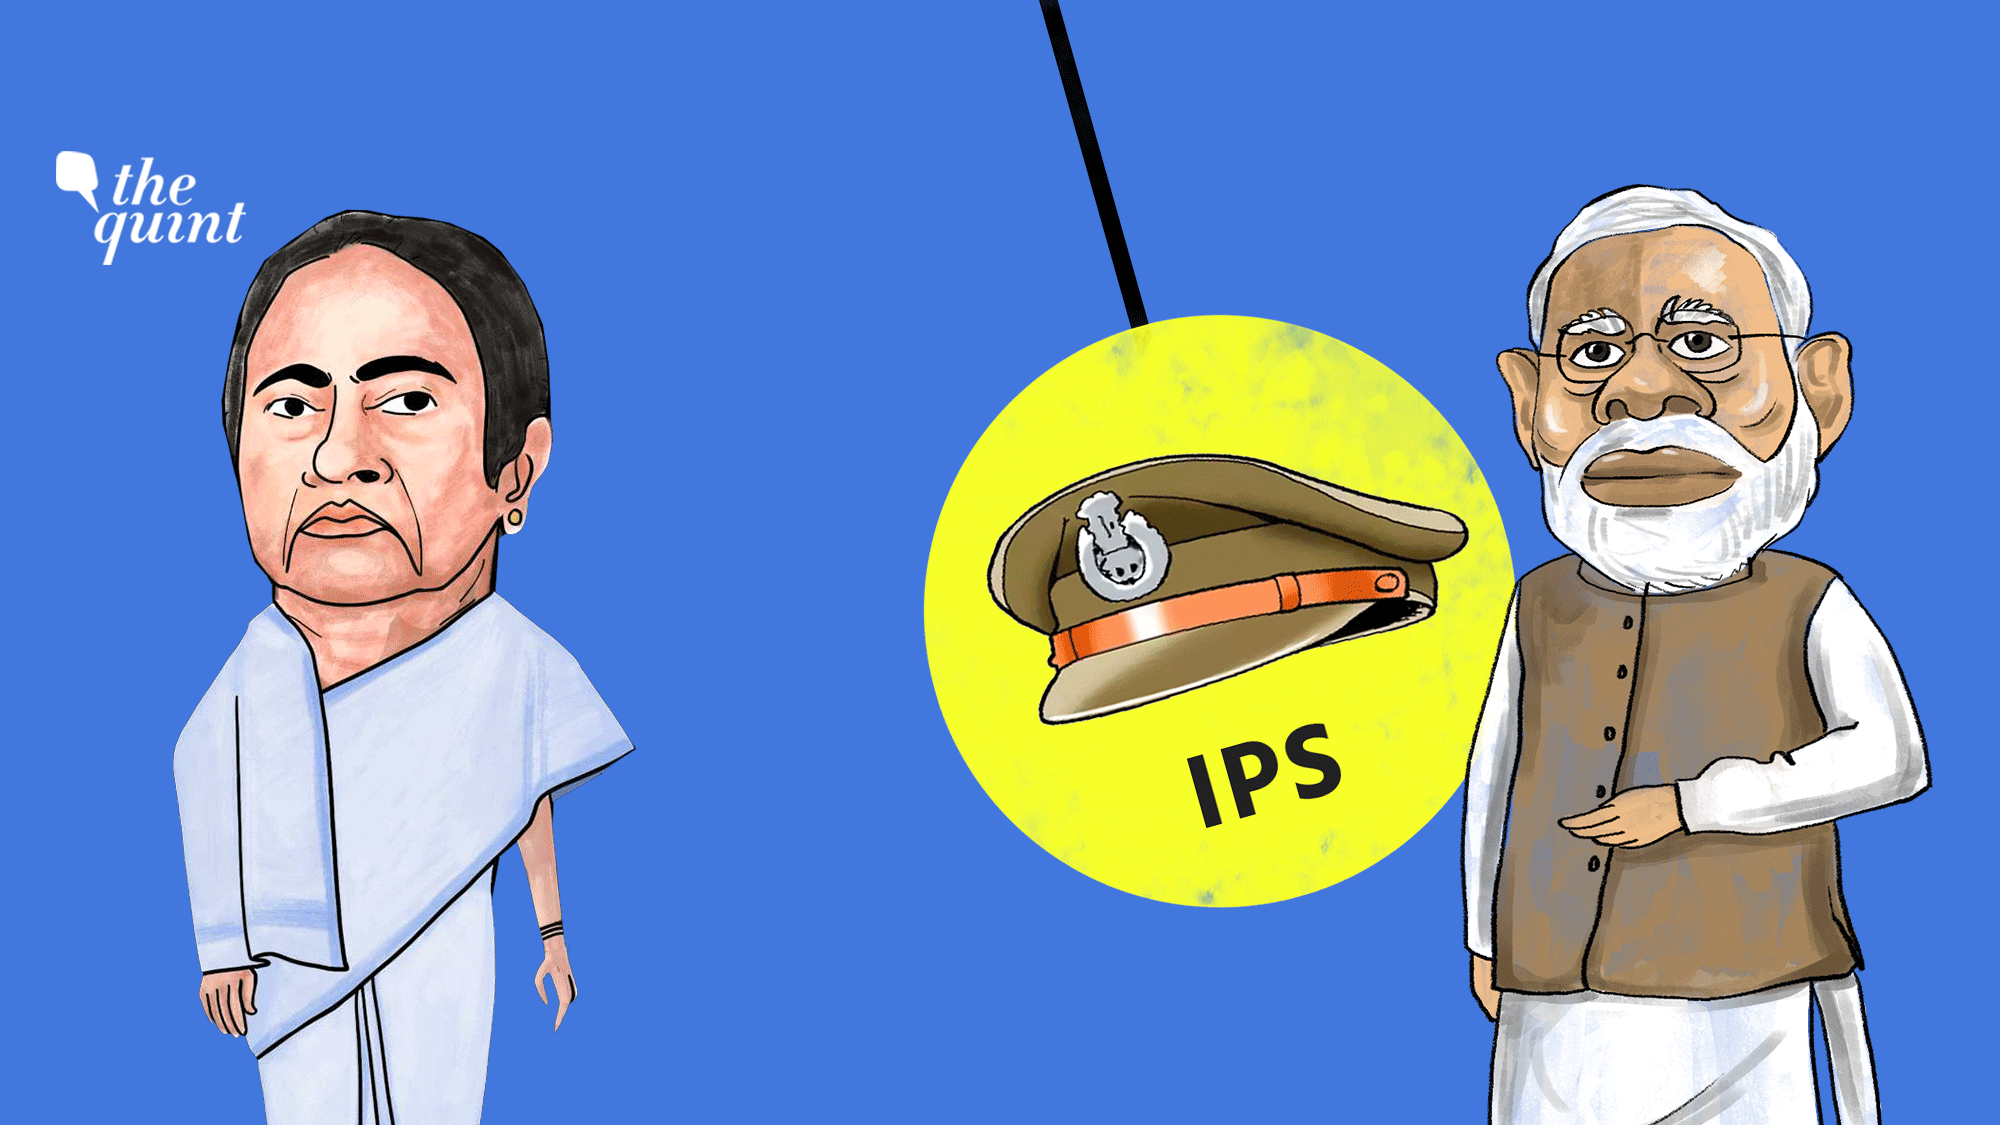 West Bengal Vs Centre: Indian Federalism Harmed in Mamata Banerjee's TMC  Government Vs BJP Government in the Centre Fighting Over Transfer of 3 IPS  Officers